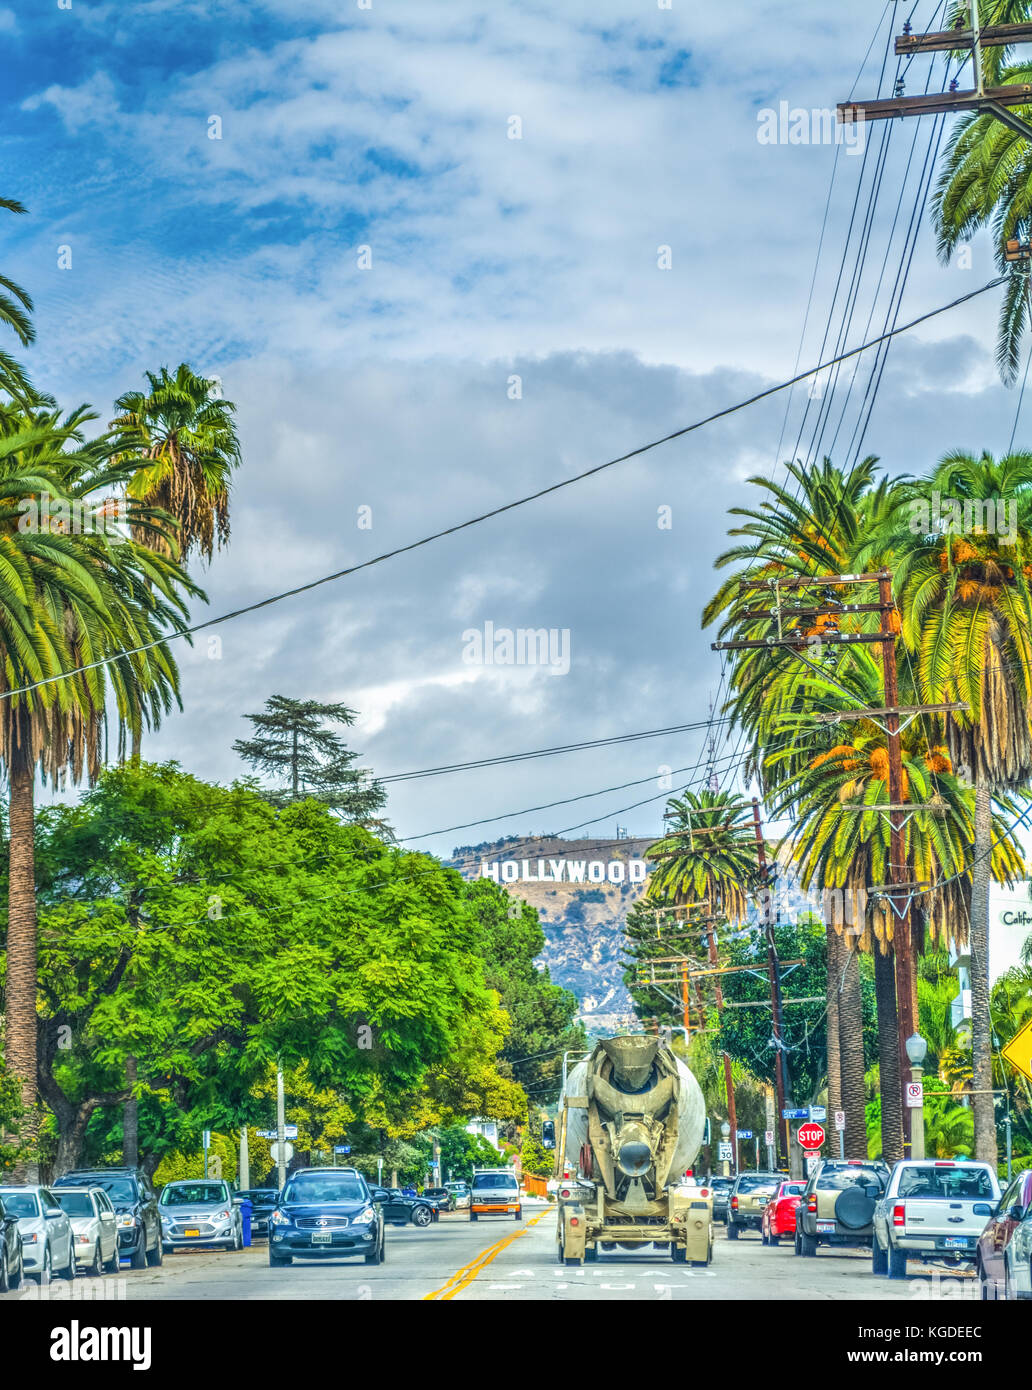 LOS ANGELES, CALIFORNIA - OCTOBER 28, 2016: Hollywood sign seen from Beachwood drive Stock Photo